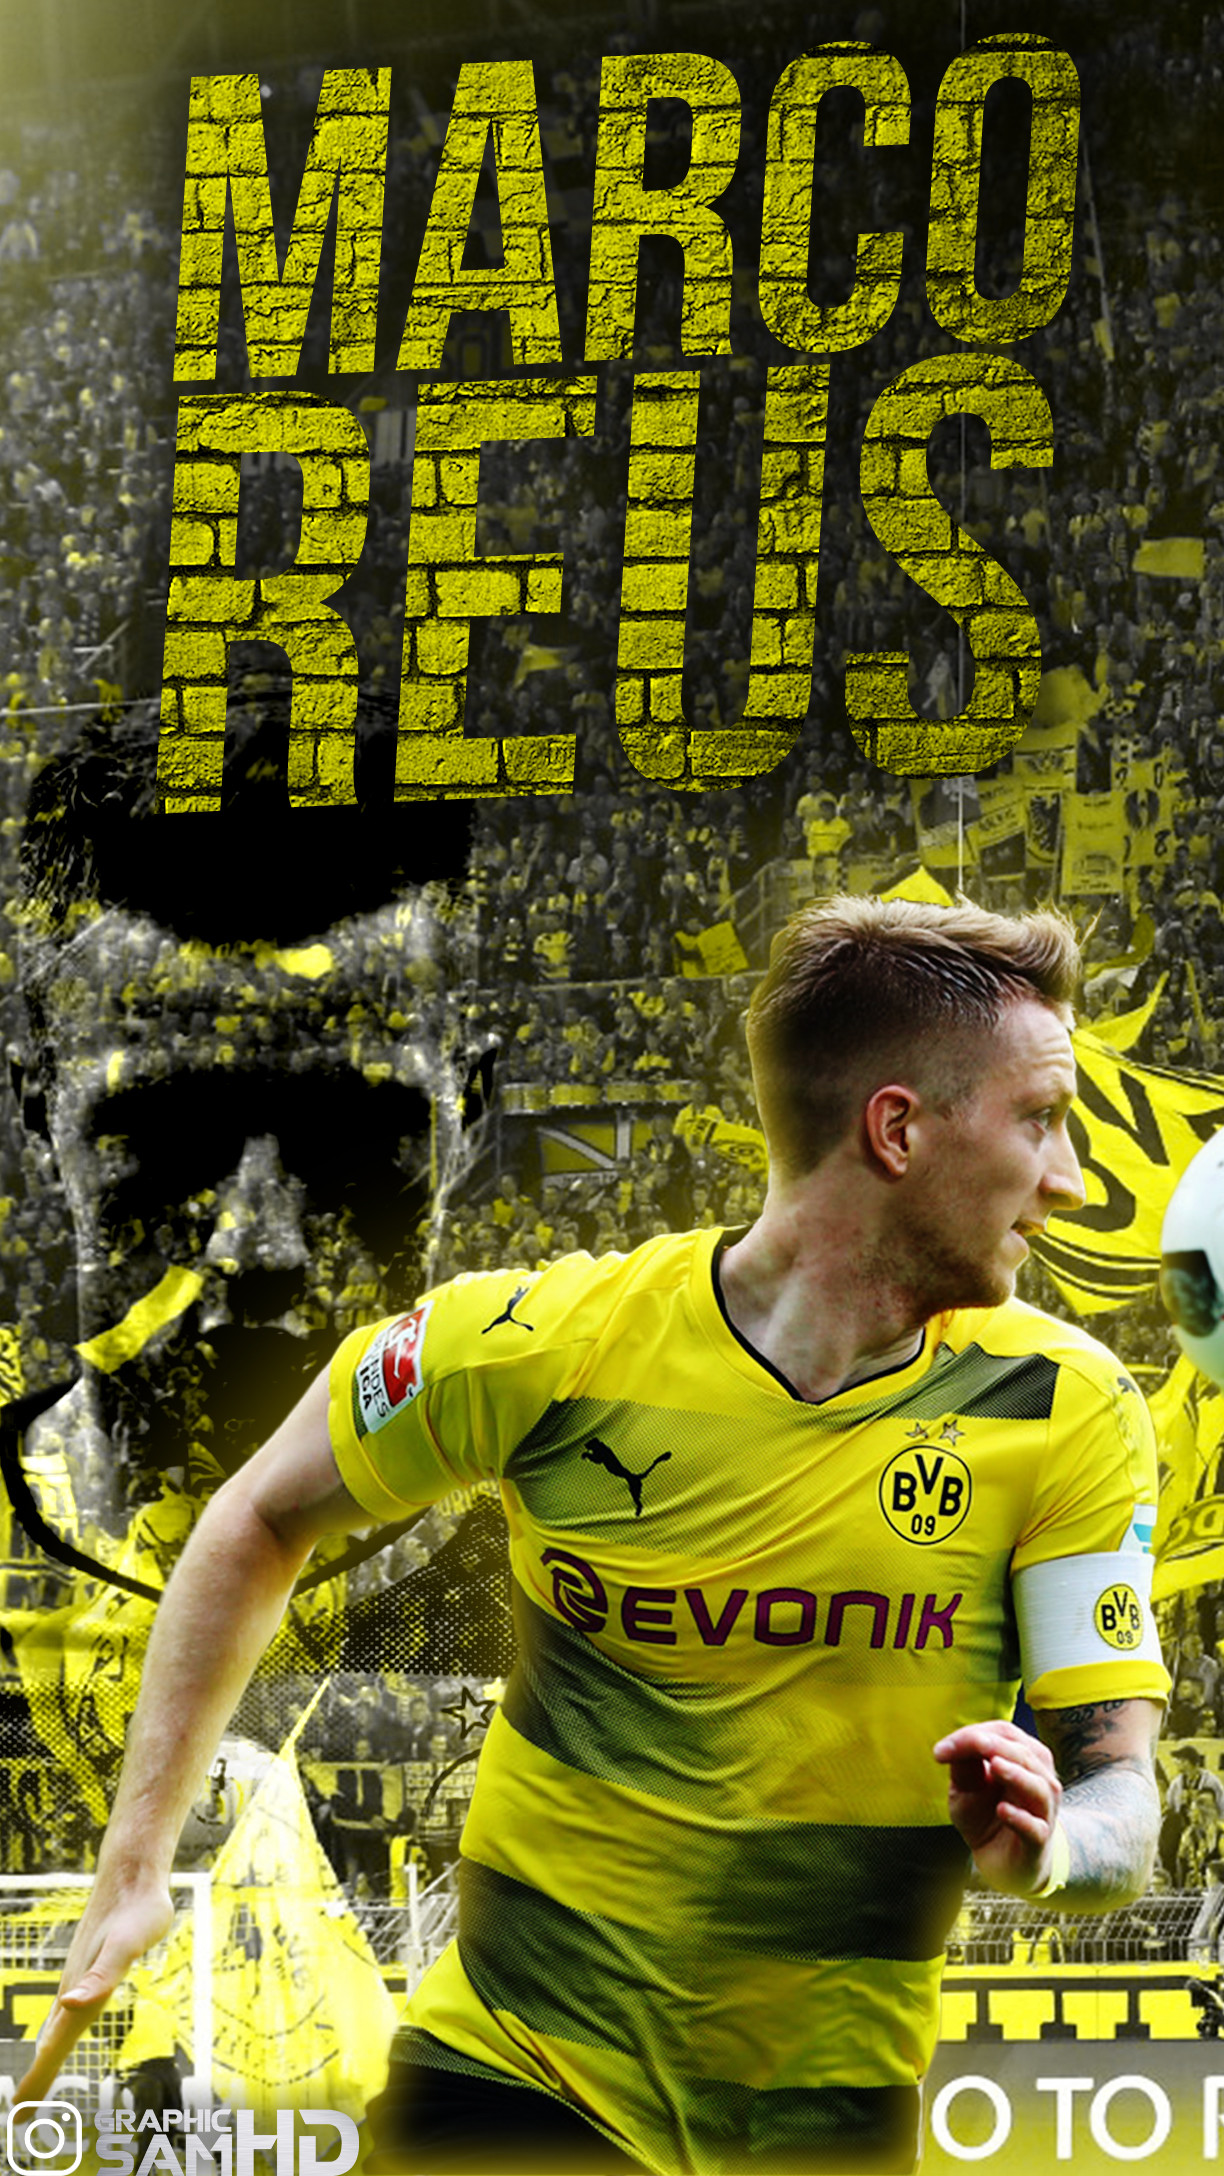 Marco Reus 2018 Wallpaper - Marco Reus Wallpaper 2018 , HD Wallpaper & Backgrounds